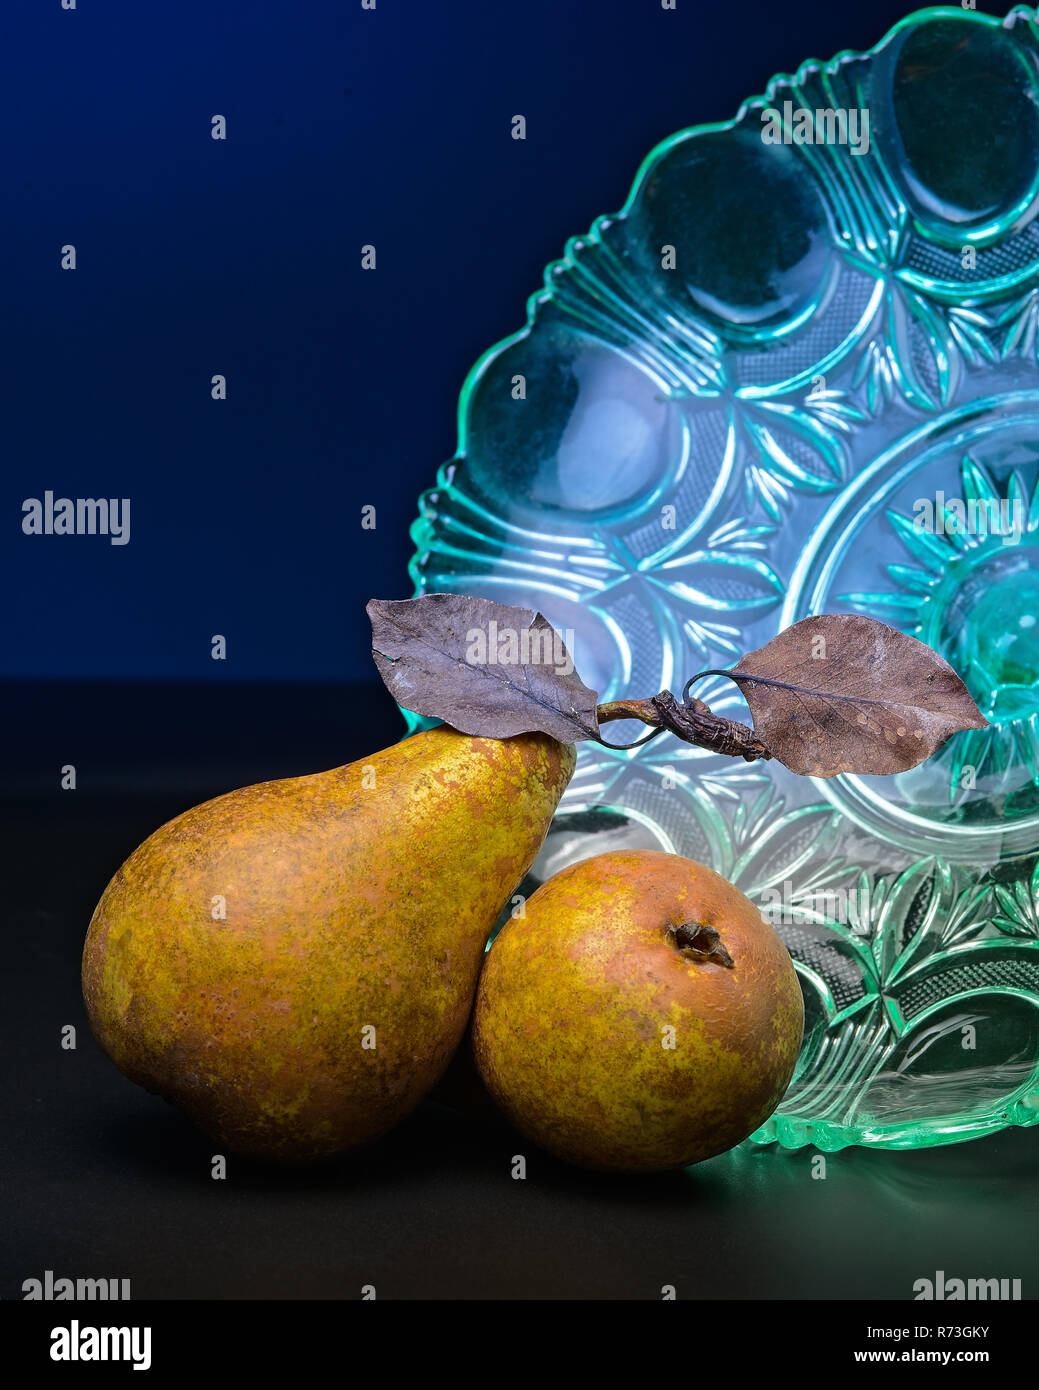 Pears and fruit container Stock Photo